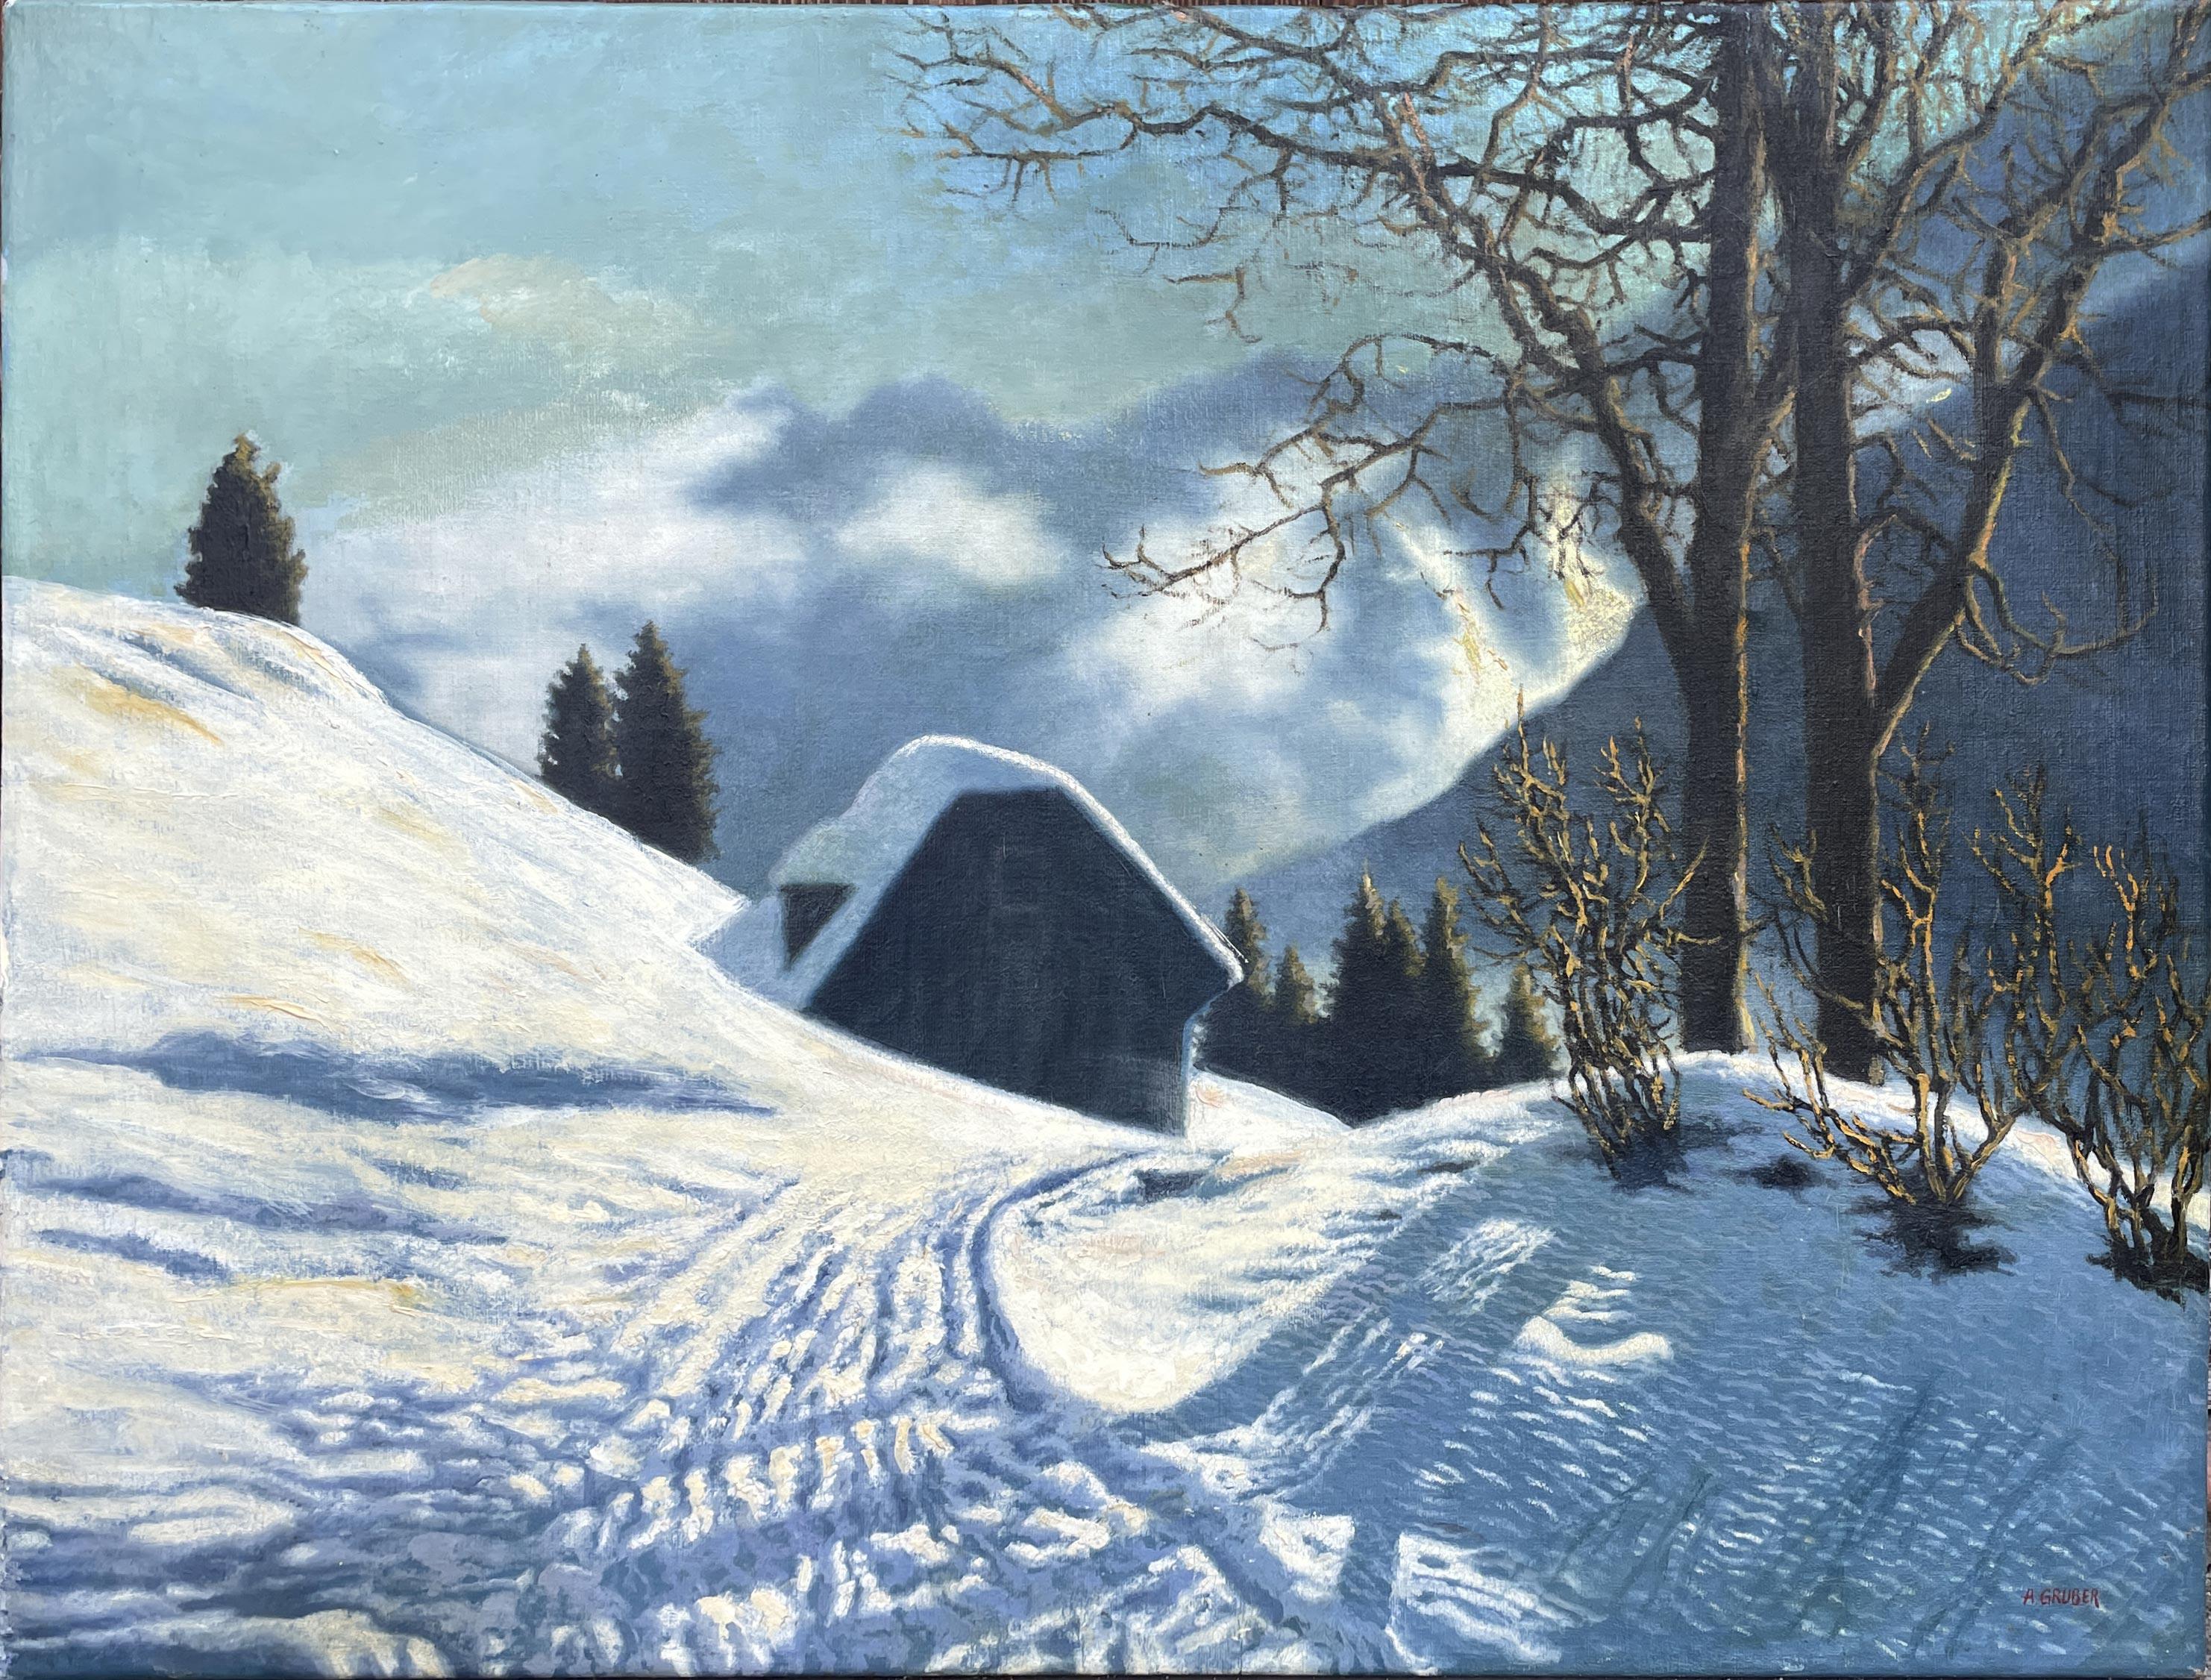 Albert Gruber, Hut in the Snowy Forest Oil on Canvas, 1940 12